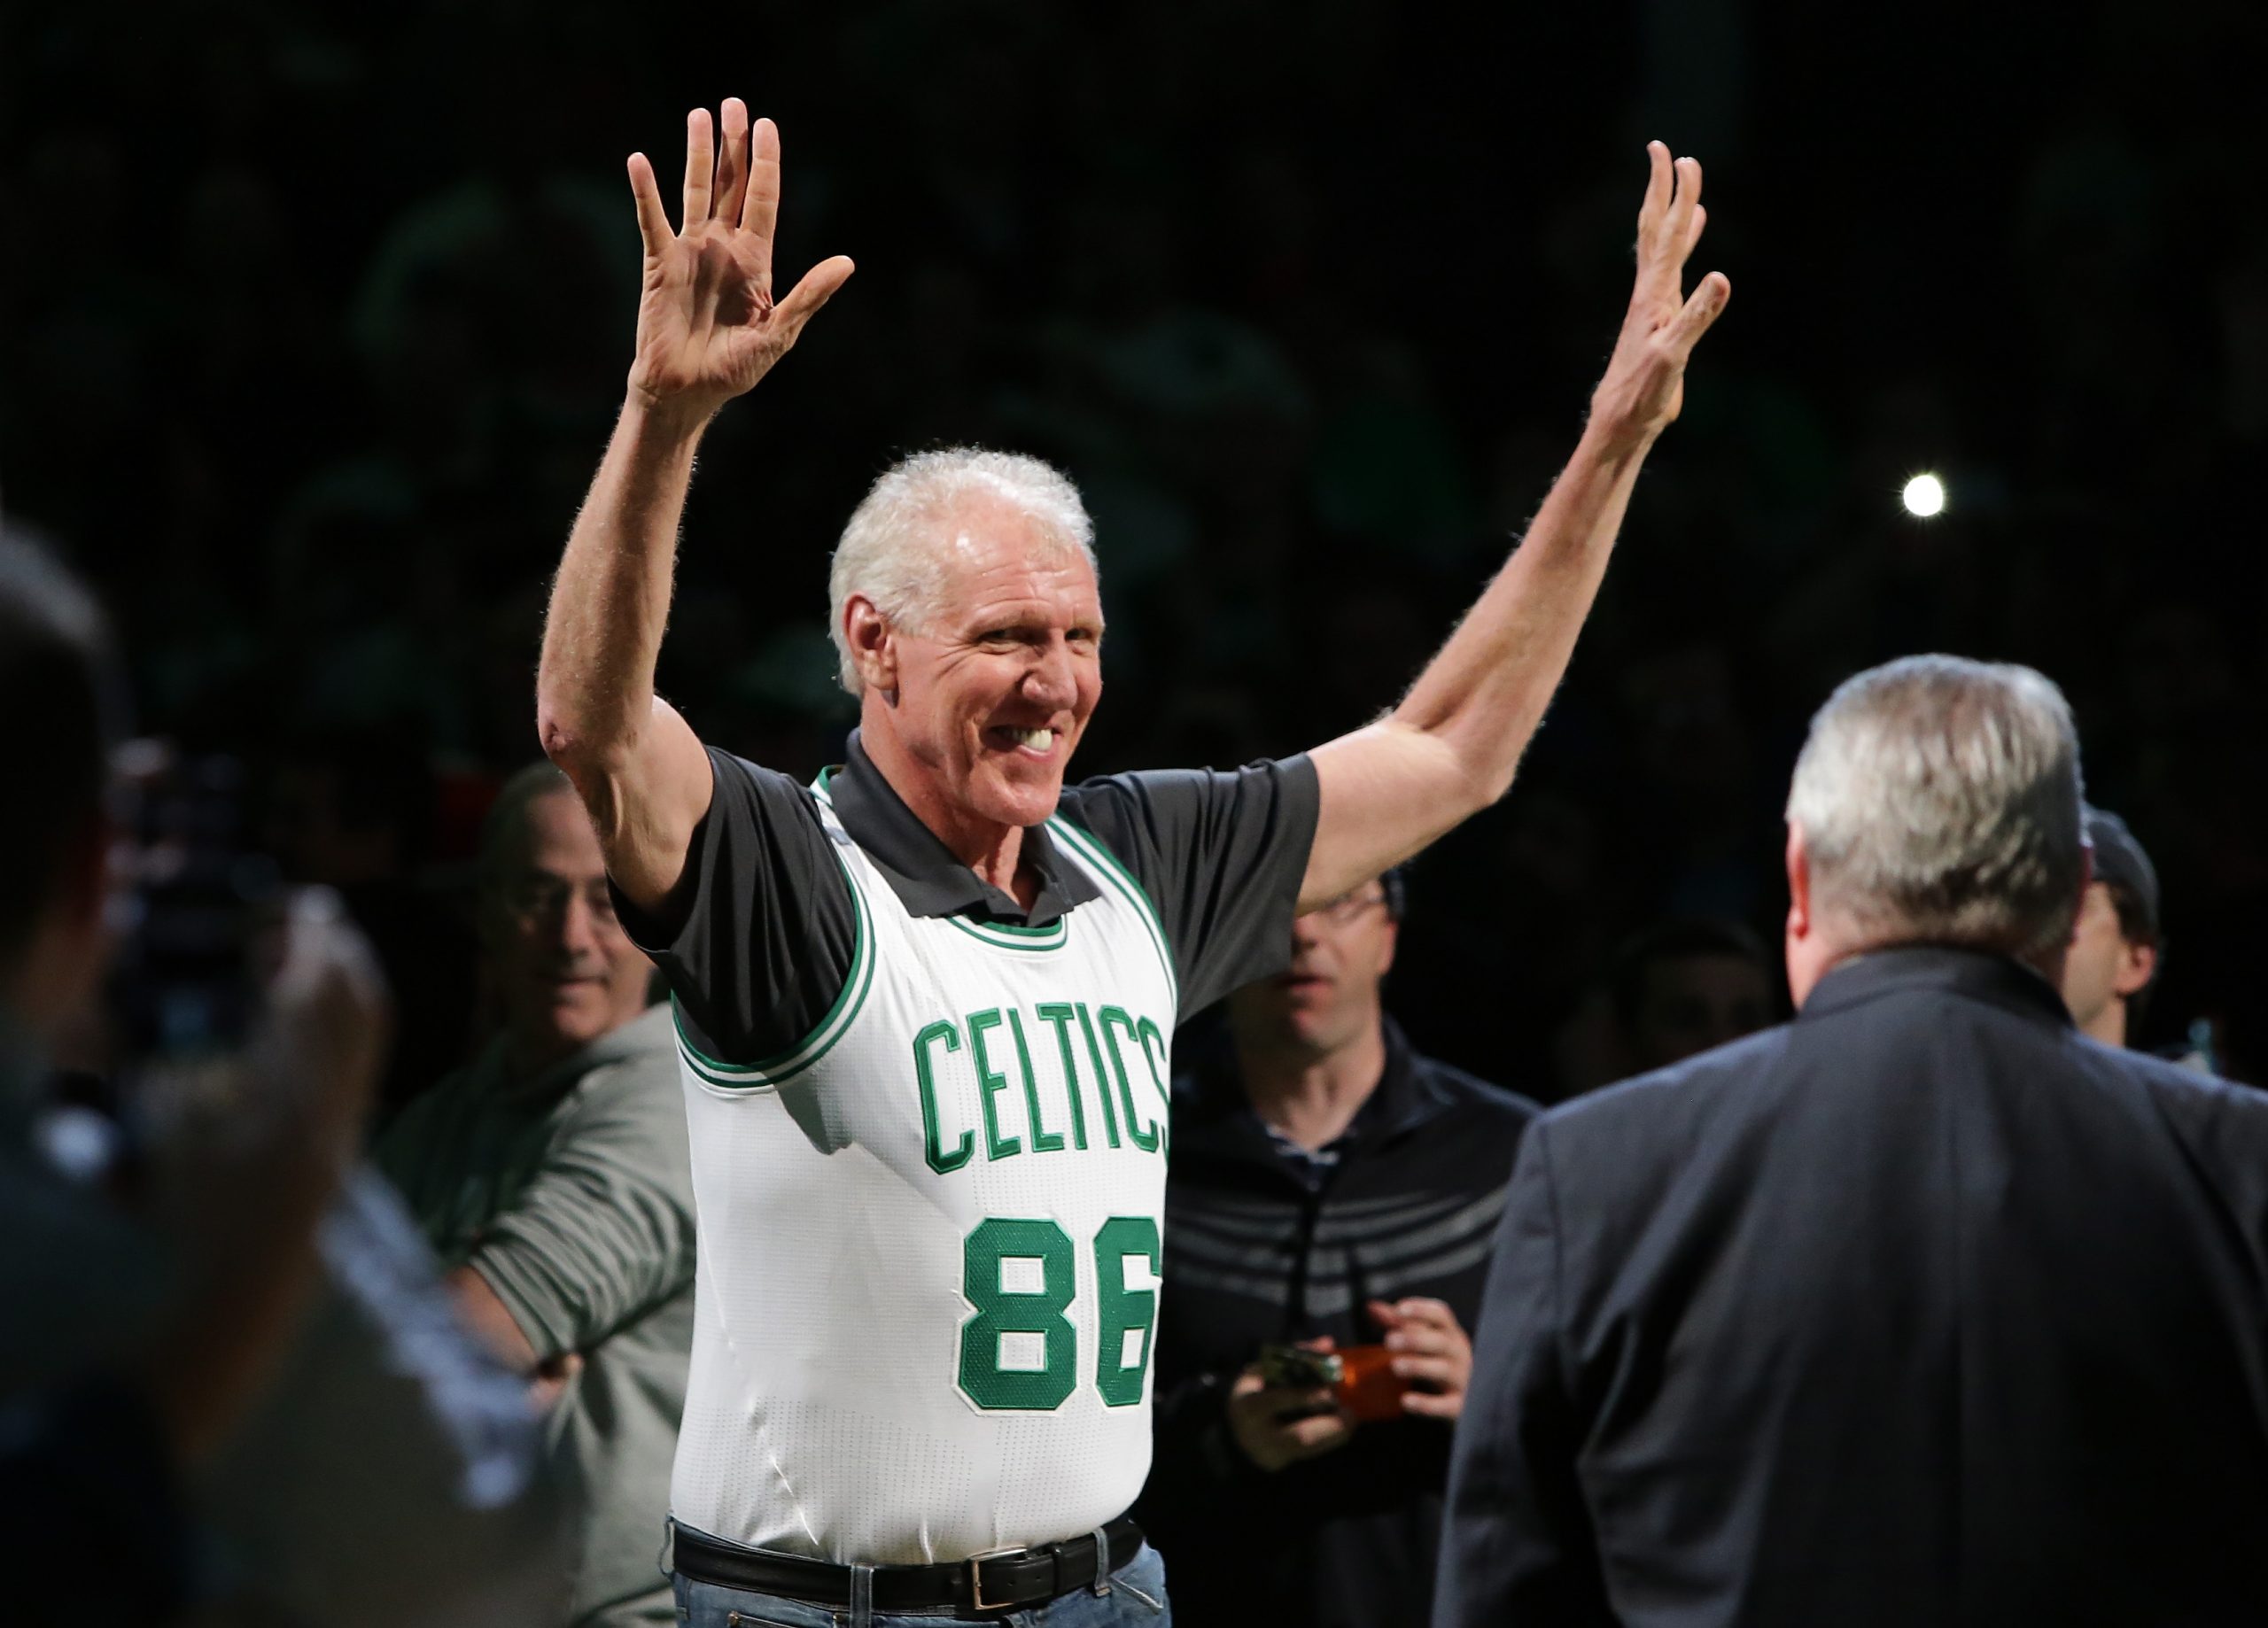 Bill Walton is honored by the Boston Celtics at halftime of the game between the Celtics and the Miami Heat at TD Garden on April 13, 2016, in Boston, Massachusetts.